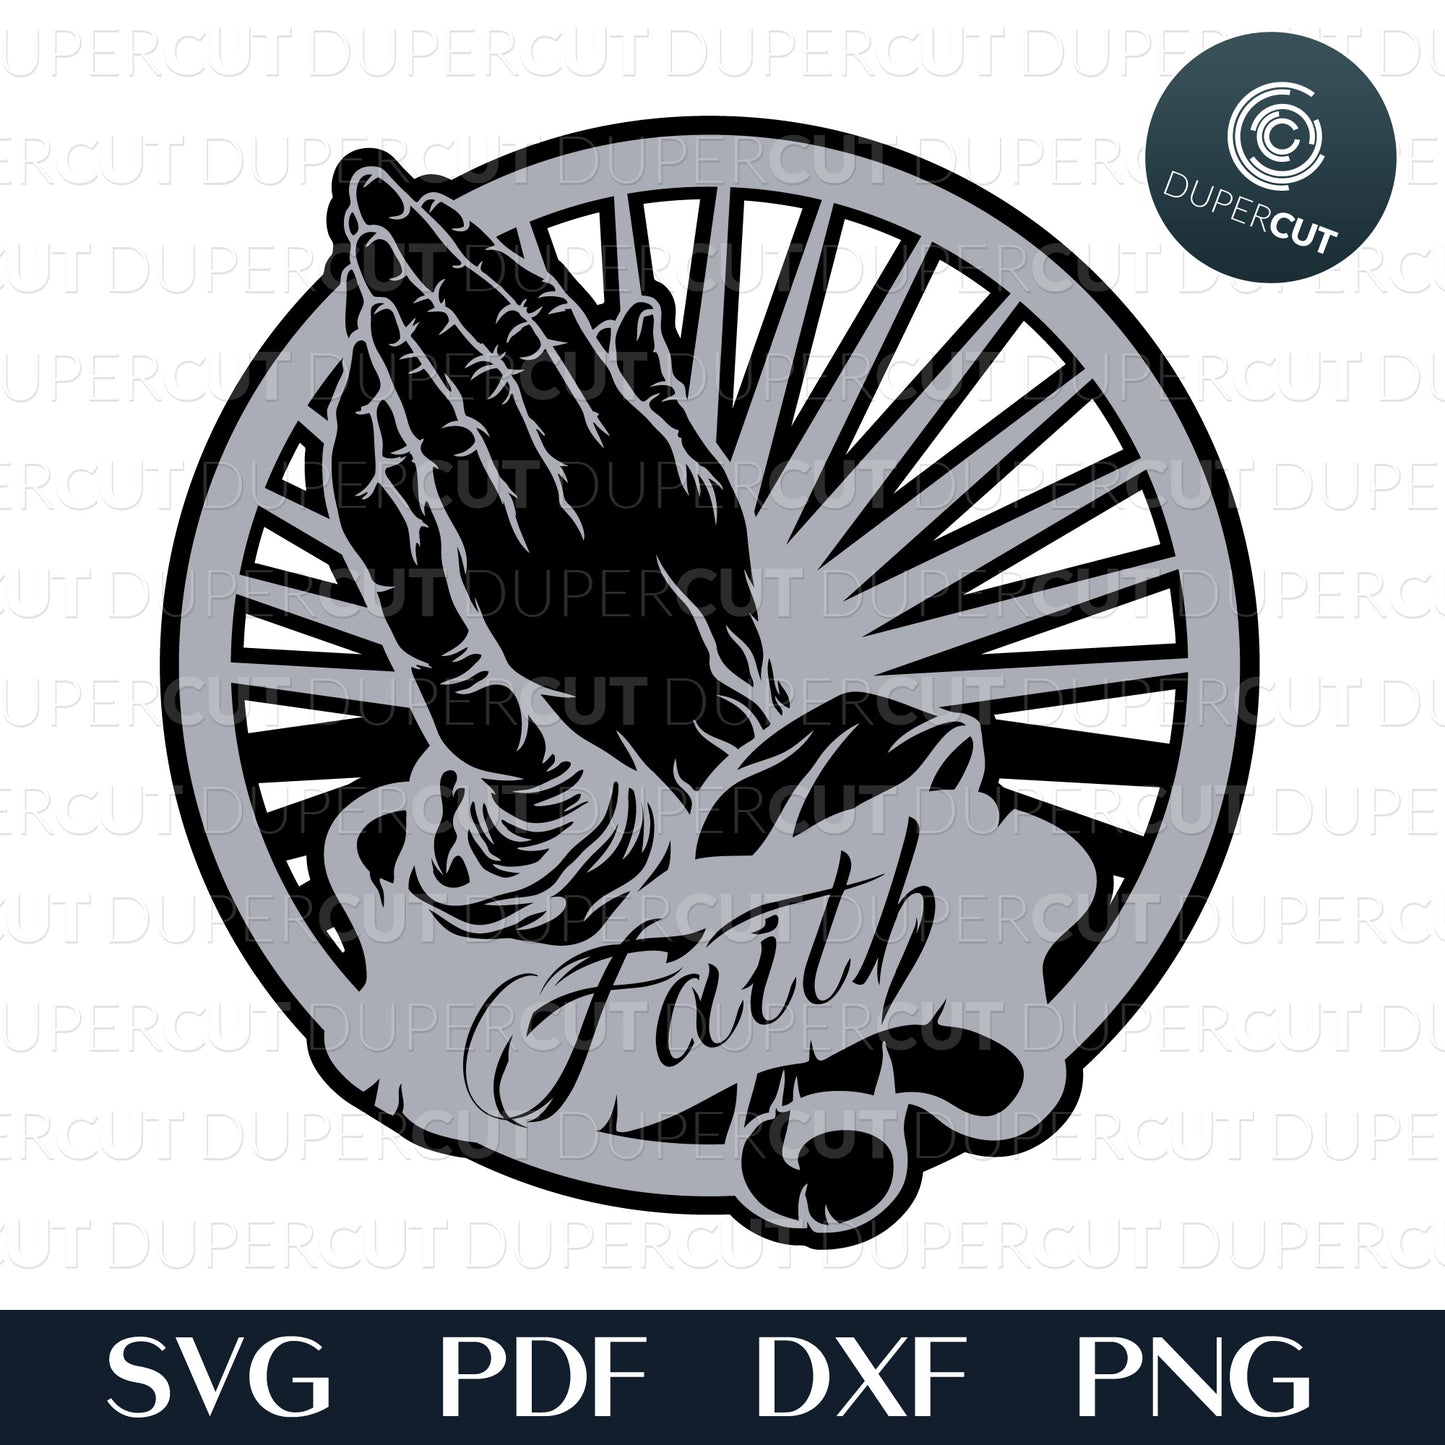 Praying hands DIY layered wood laser cutting template - SVG DXF PNG files for Cricut, Glowforge, Silhouette Cameo, CNC Machines